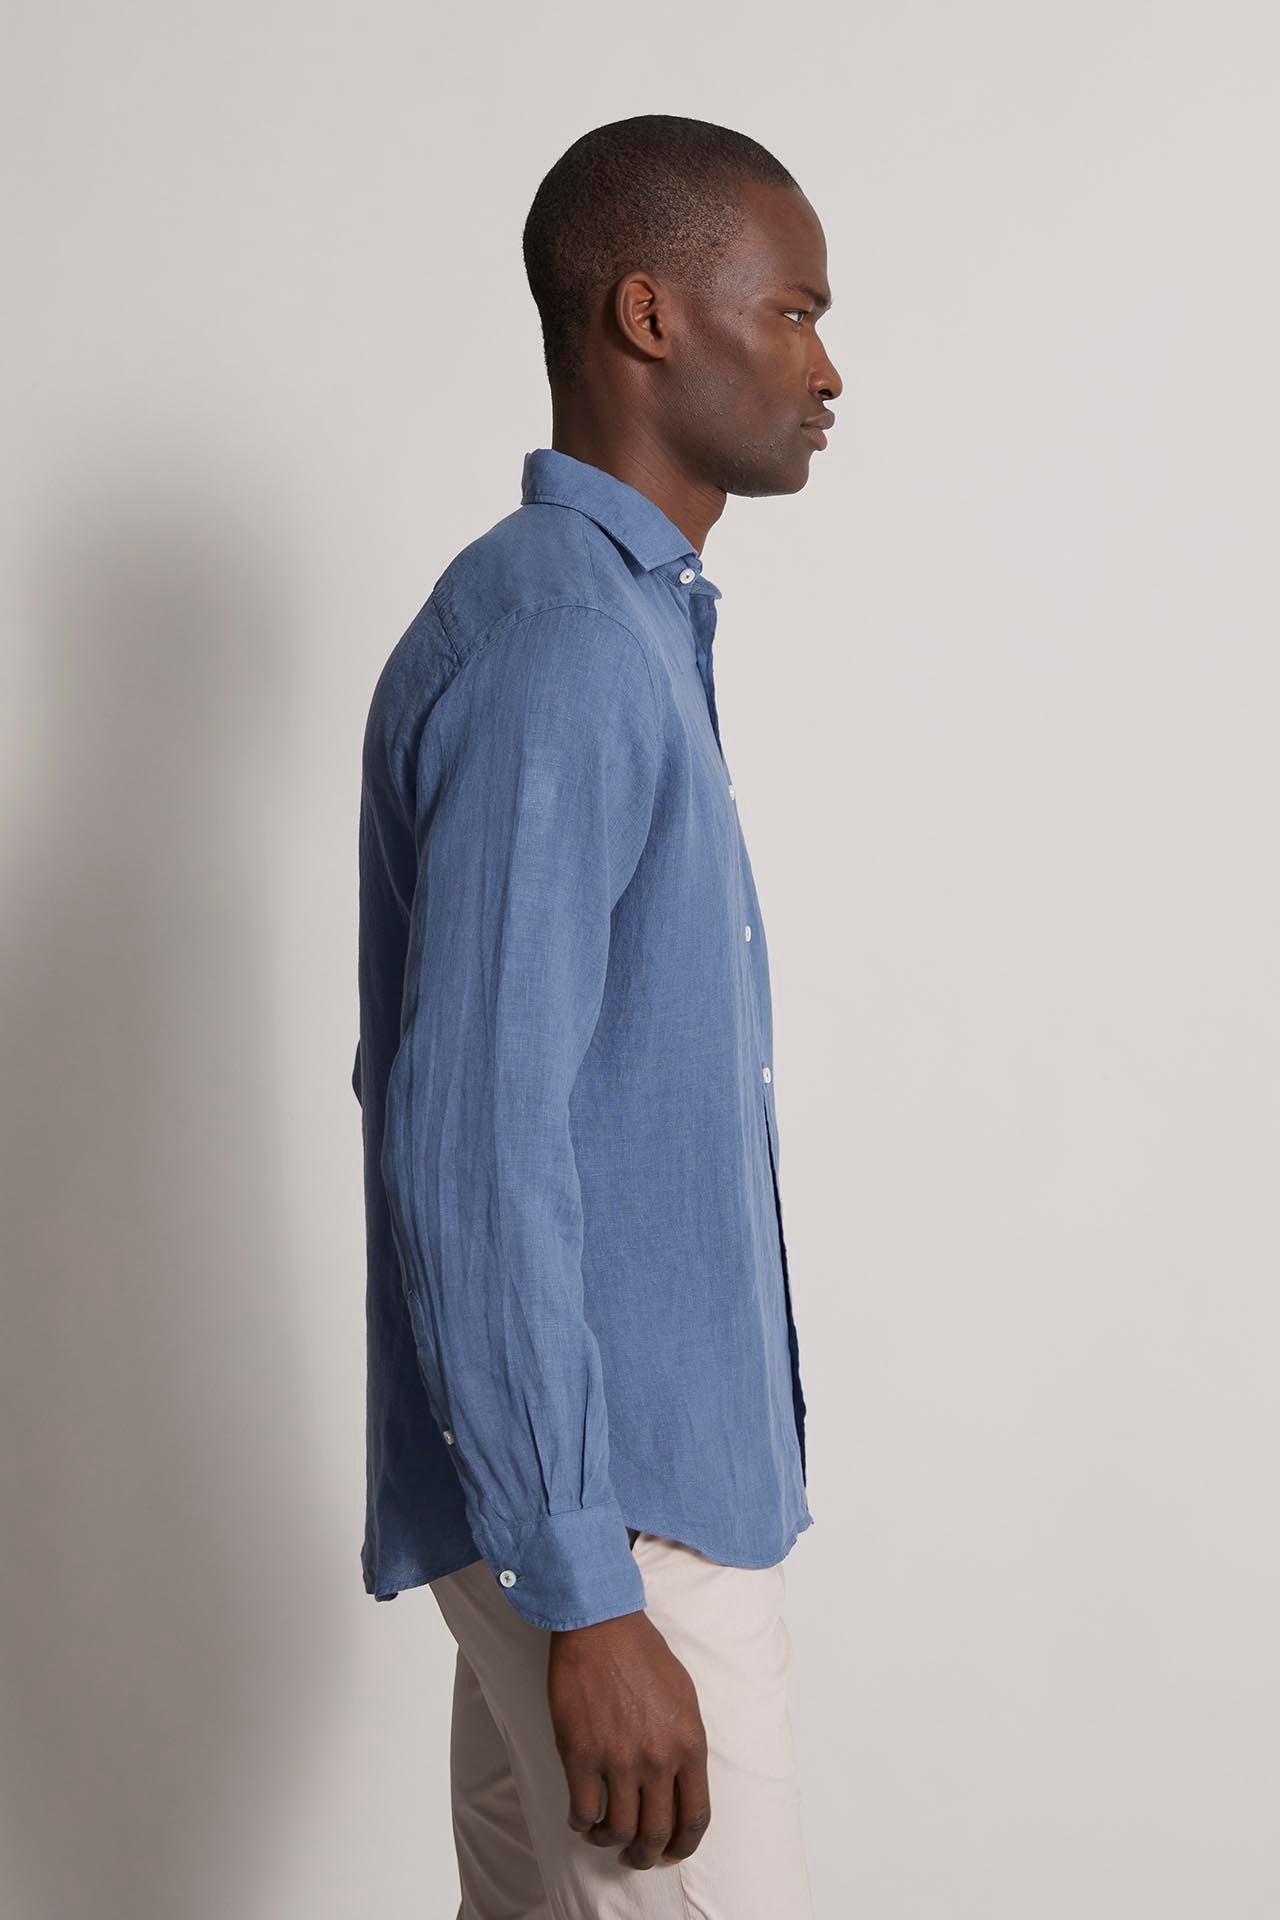 Men's Linen Shirts with Long Sleeve - Blue - Side view